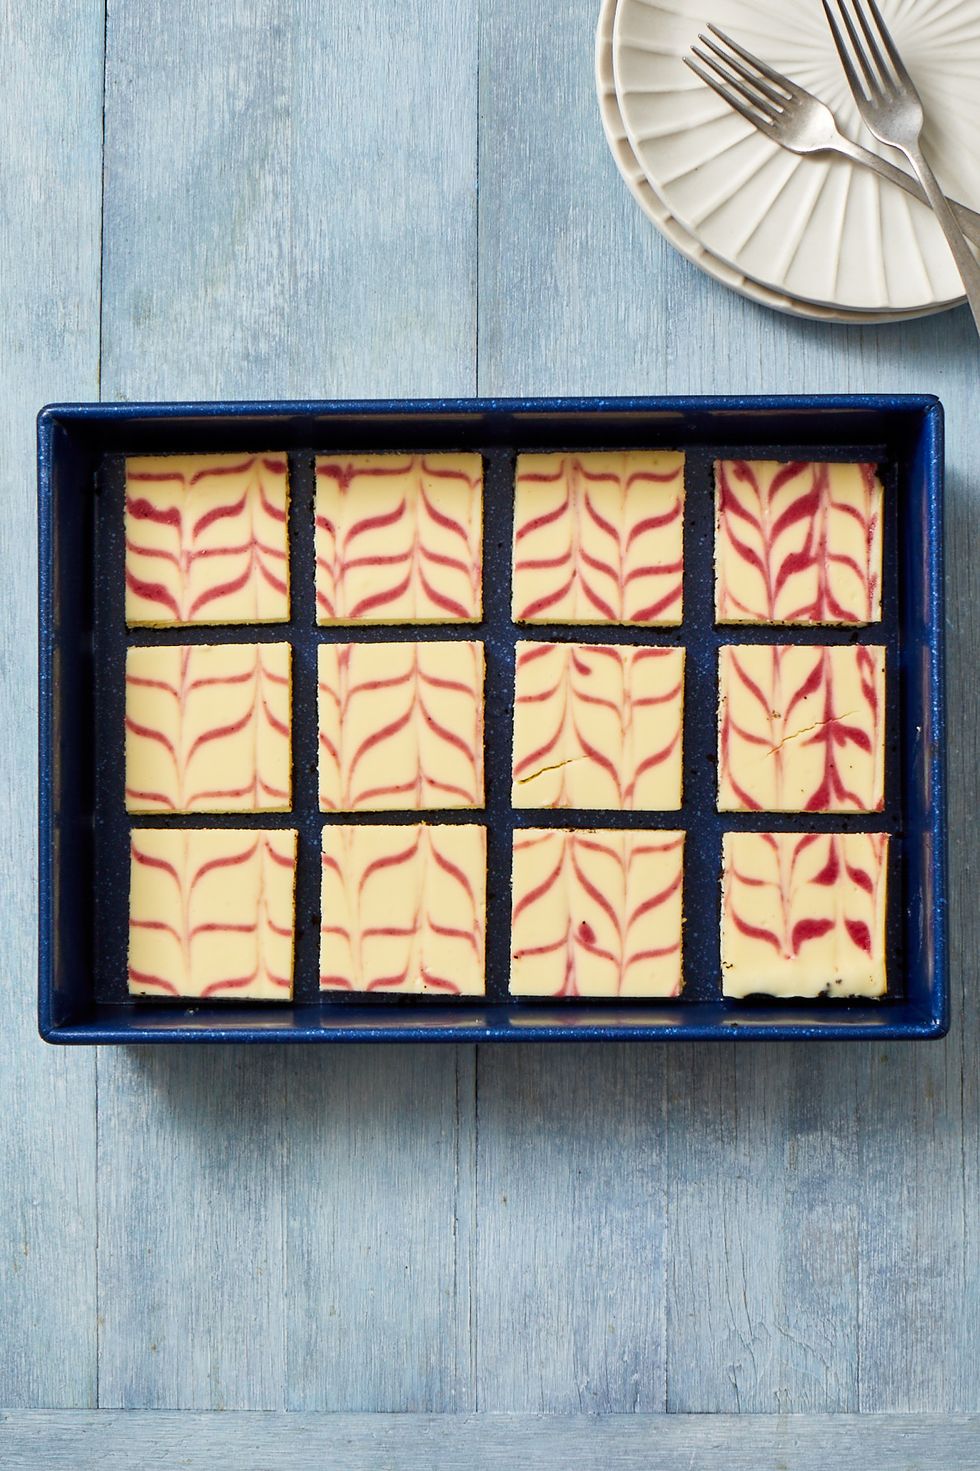 cranberry swirl cheesecake bars in a blue baking dish